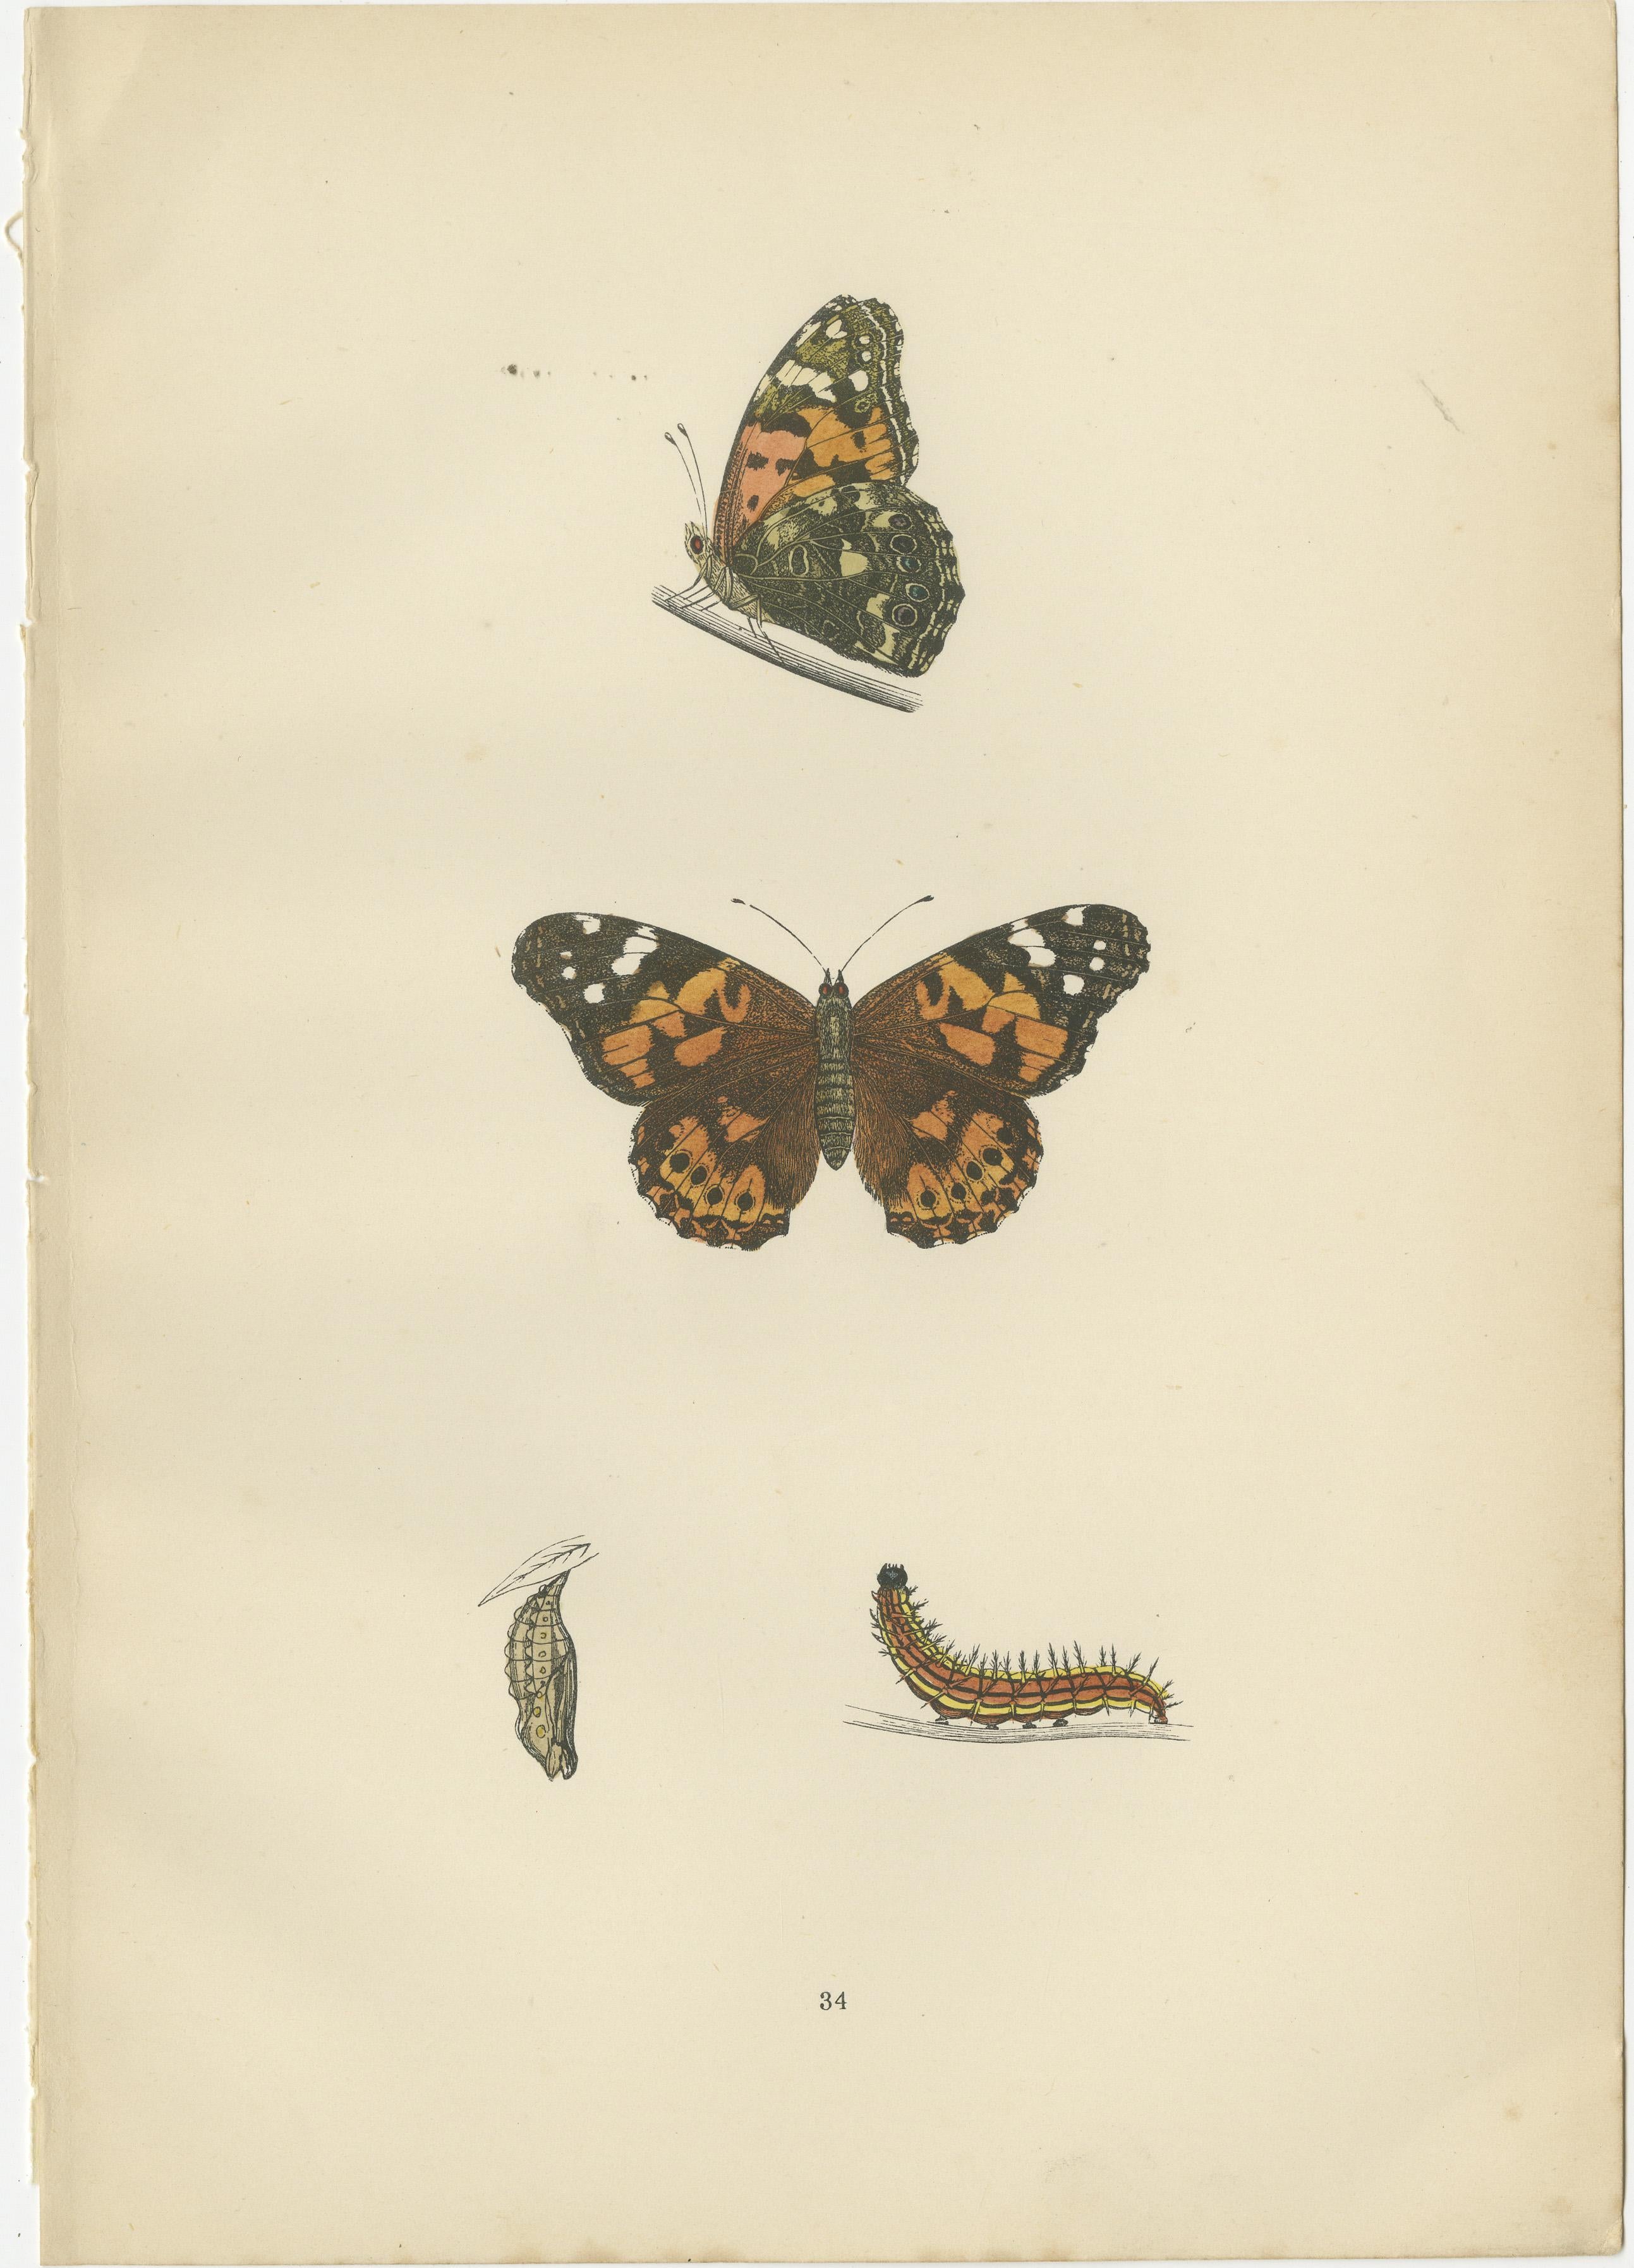 Three original antique hand-coloured prints of Butterflies. They are the Painted Lady, Scarce Painted Lady and Purple Emperor. 

Here is a more detailed description of each one based on the context of 